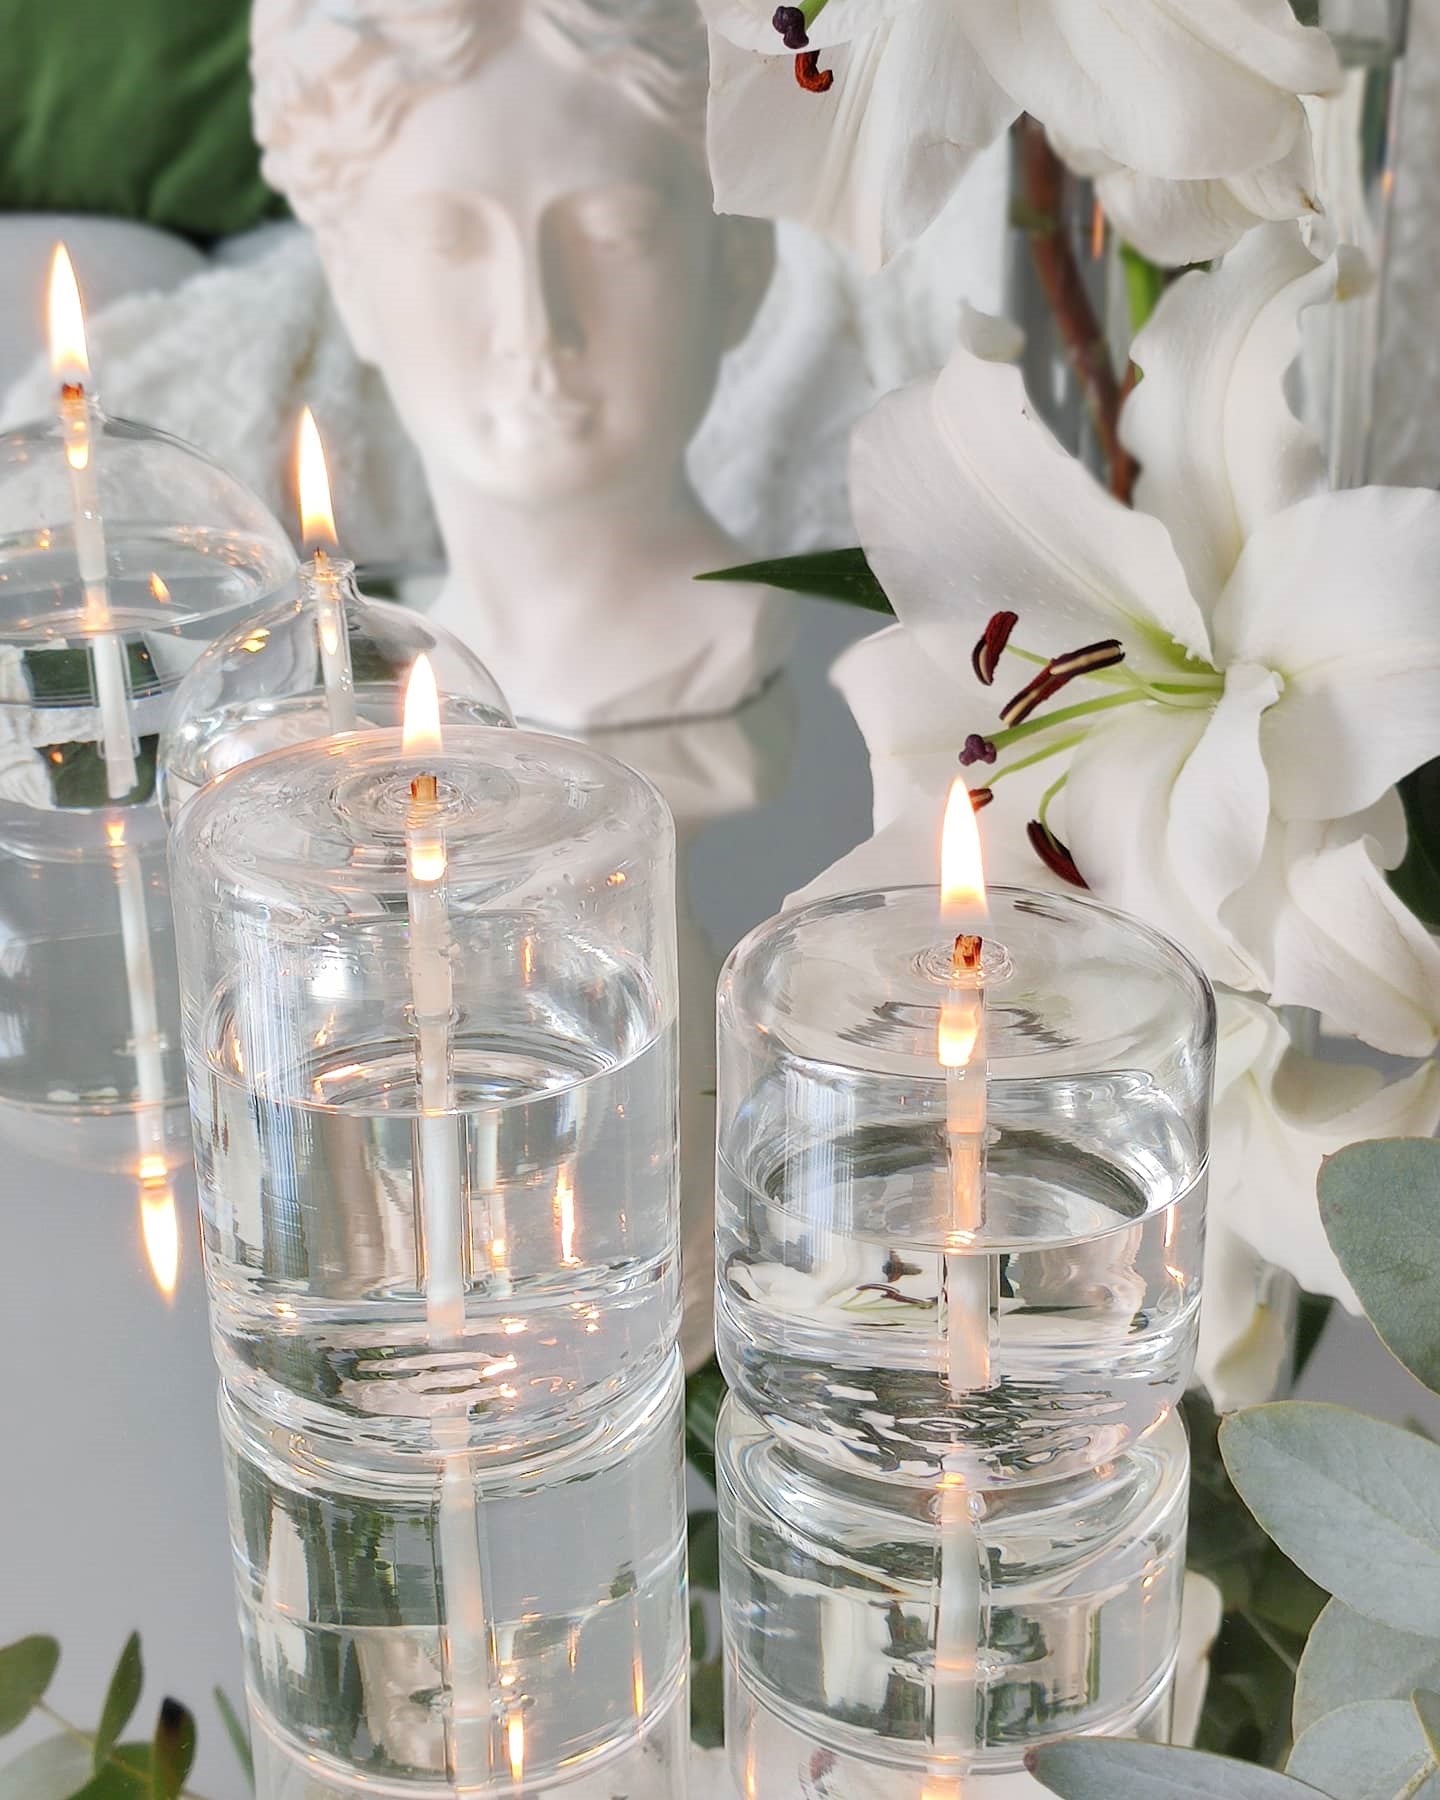 Quem Handmade Clear Glass Cylinder-Shaped Candle with Glass Wick. Modern Home Decor. Decorative Candle Holder. Set of 2